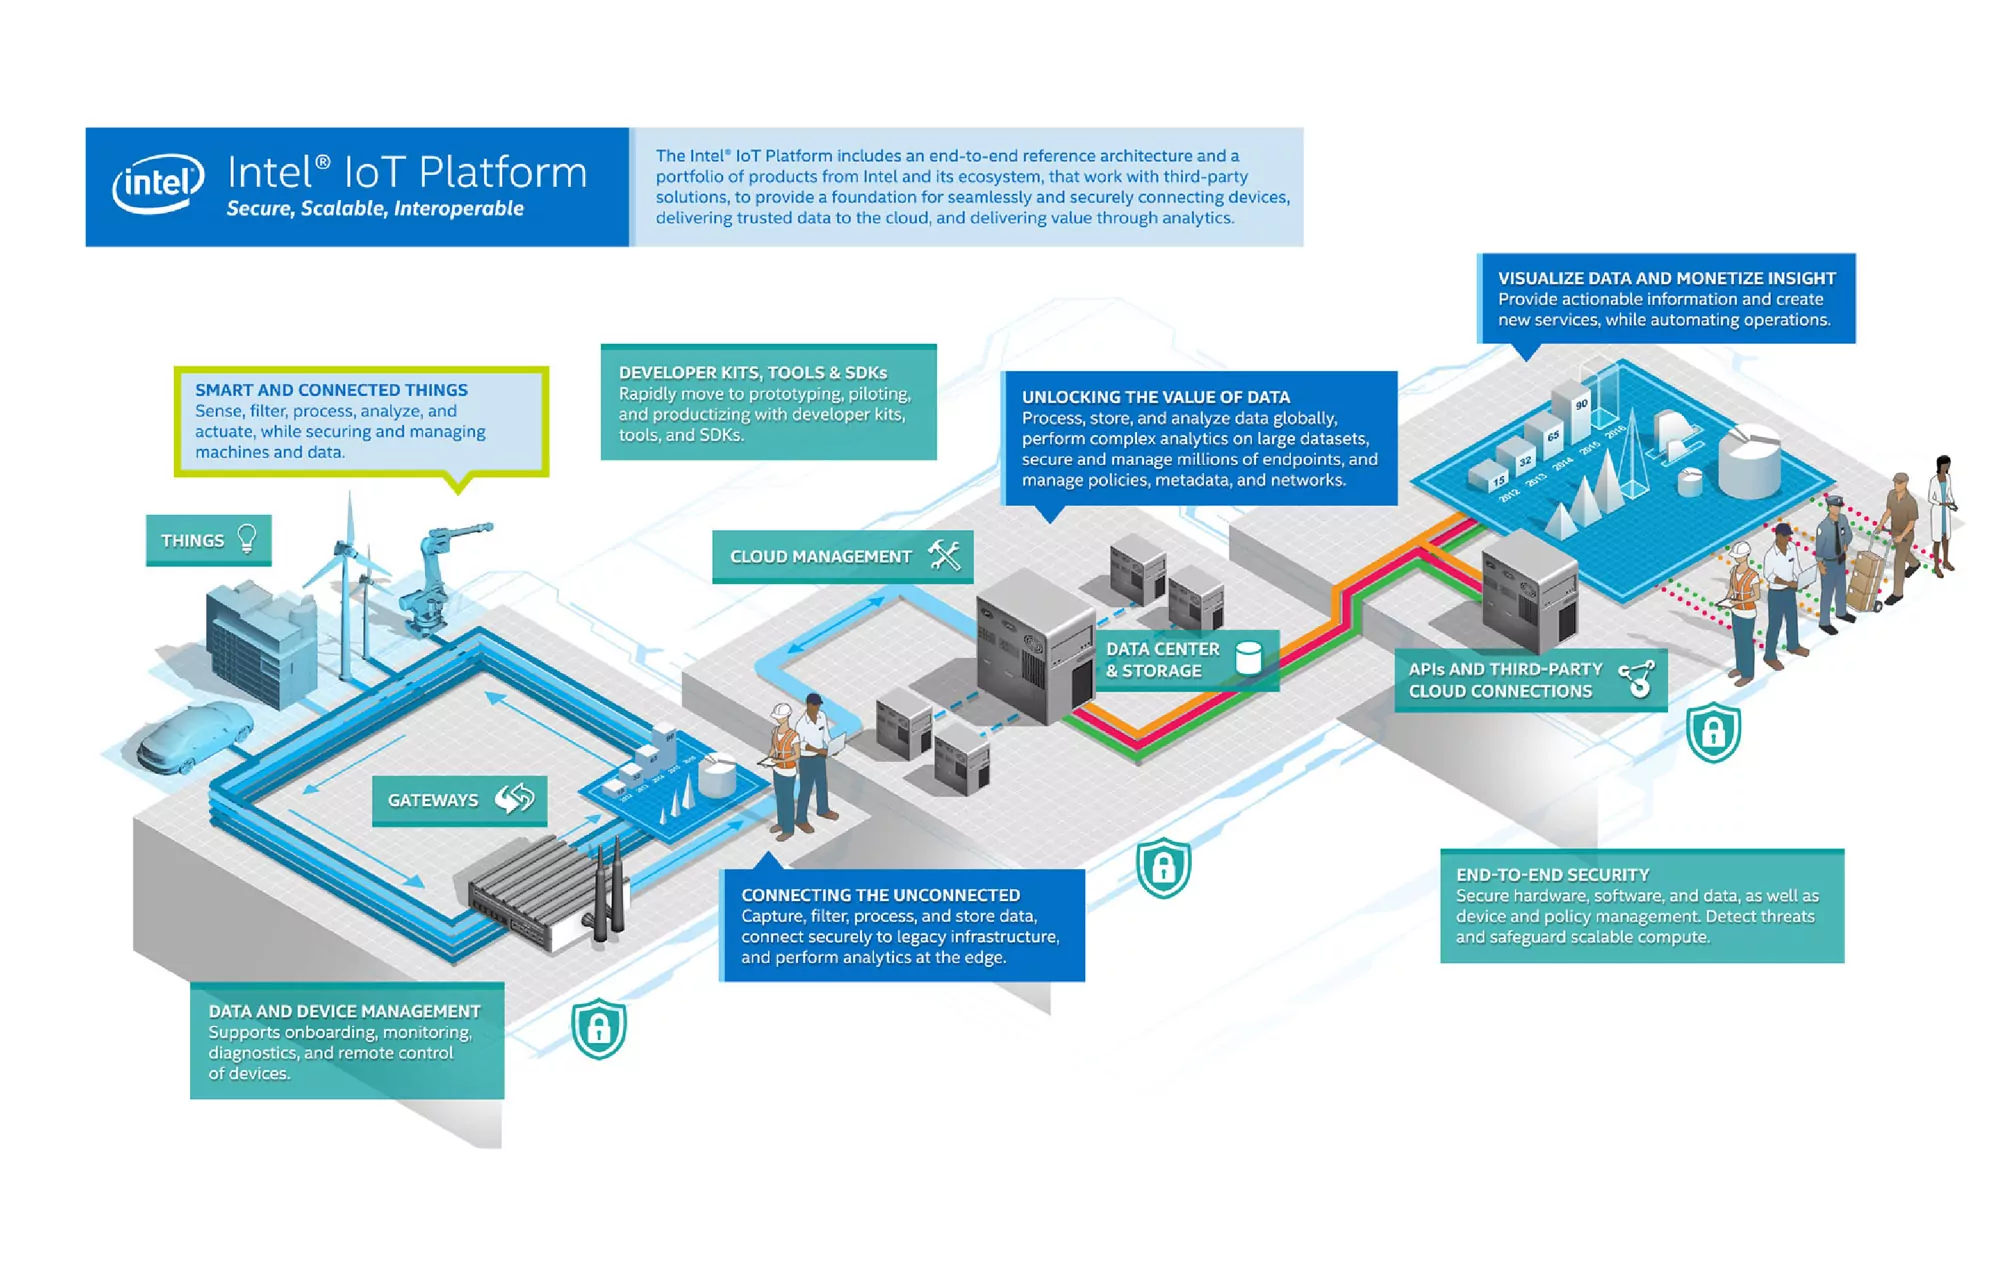 Innovation Consulting Product/Process Image/Graphic 2 - Intel